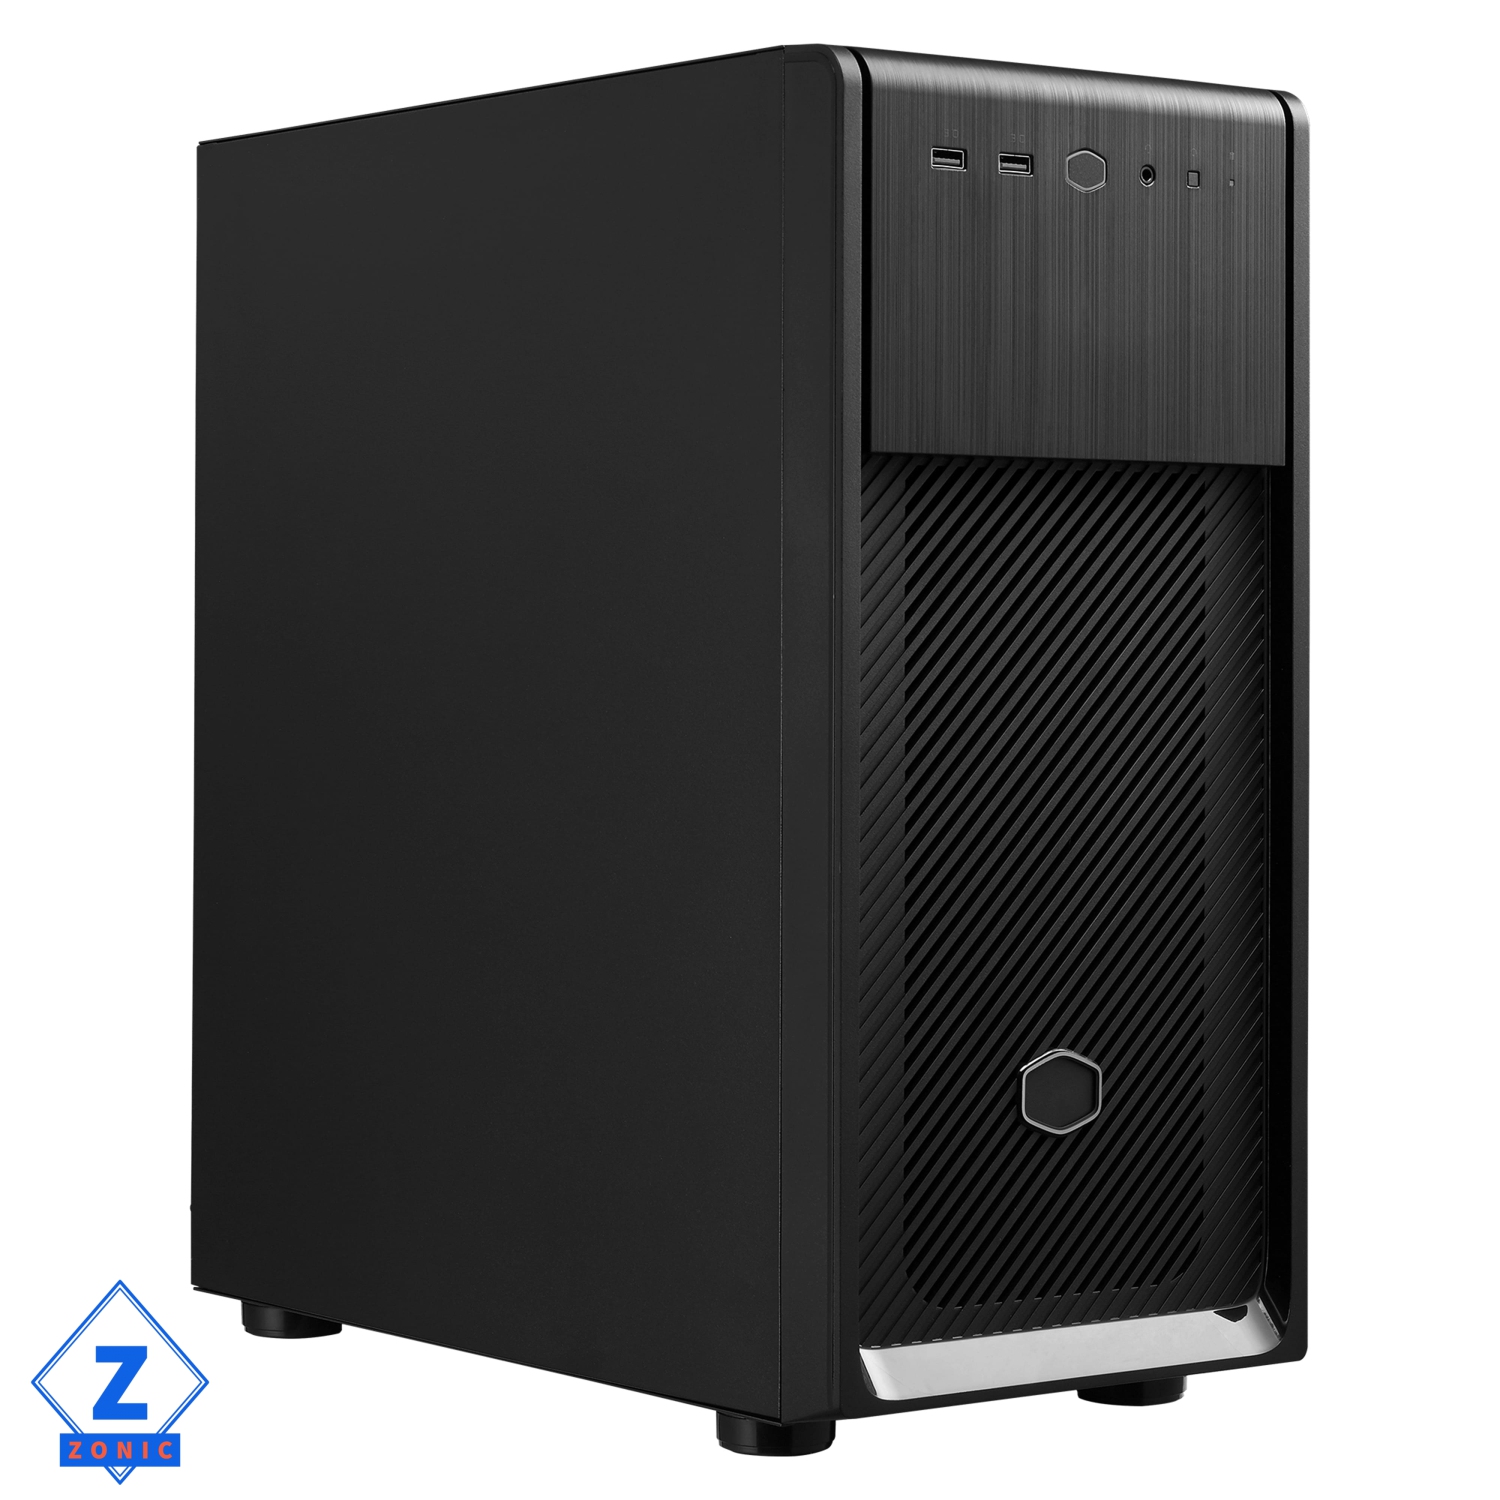 Zonic Business Custom PC, Intel Core i9-12900K, 16 Cores, 2 TB NVME SSD , 64 GB RAM, Build in Wi-Fi, Keyboard, and Mouse, Windows 11 Pro